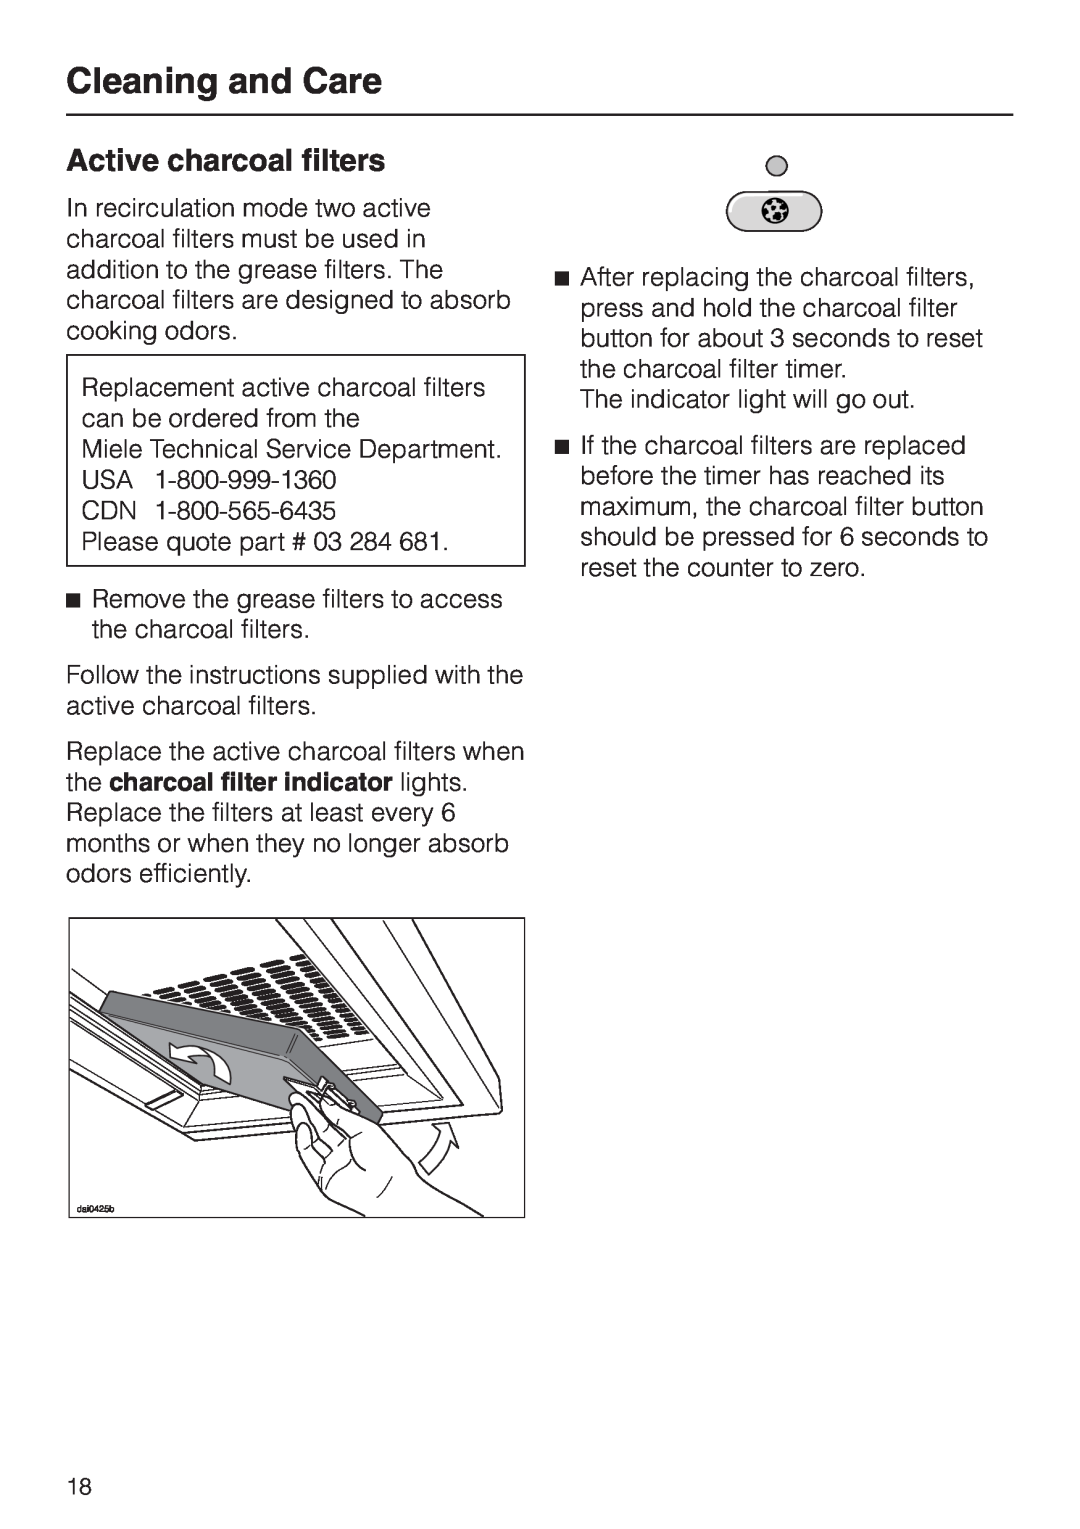 Miele DA217-3, DA 219-3 installation instructions Active charcoal filters, Cleaning and Care 